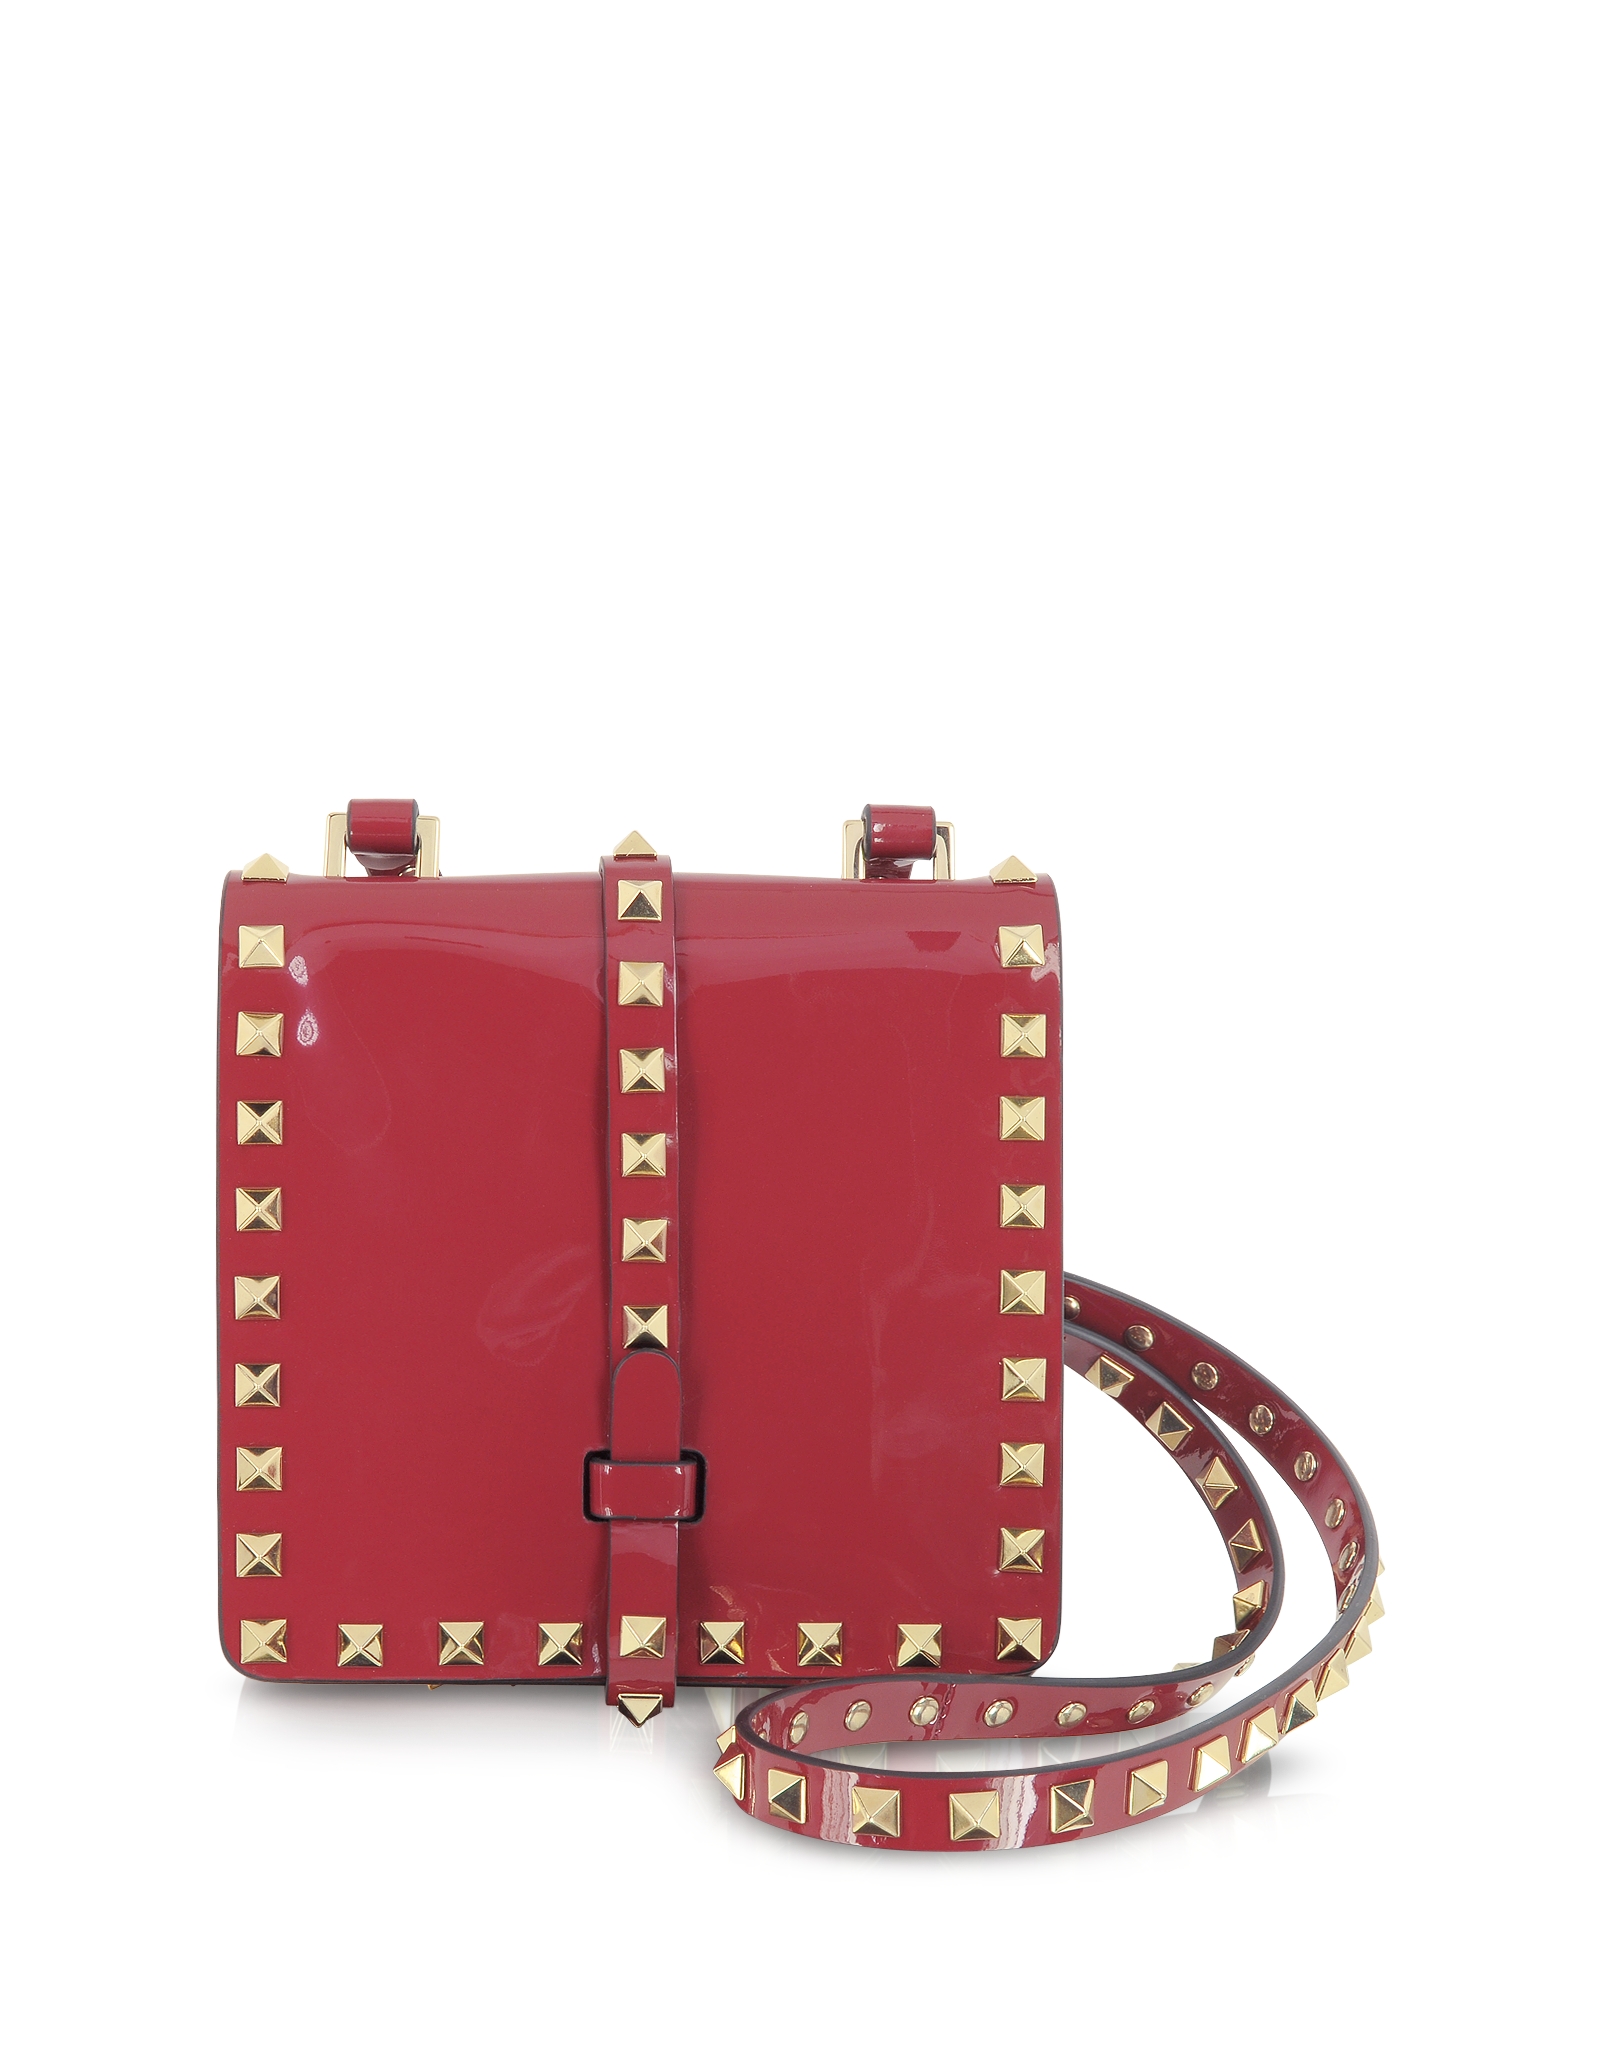 Valentino Rockstud Red Patent Leather Mini Shoulder Bag in Red | Lyst